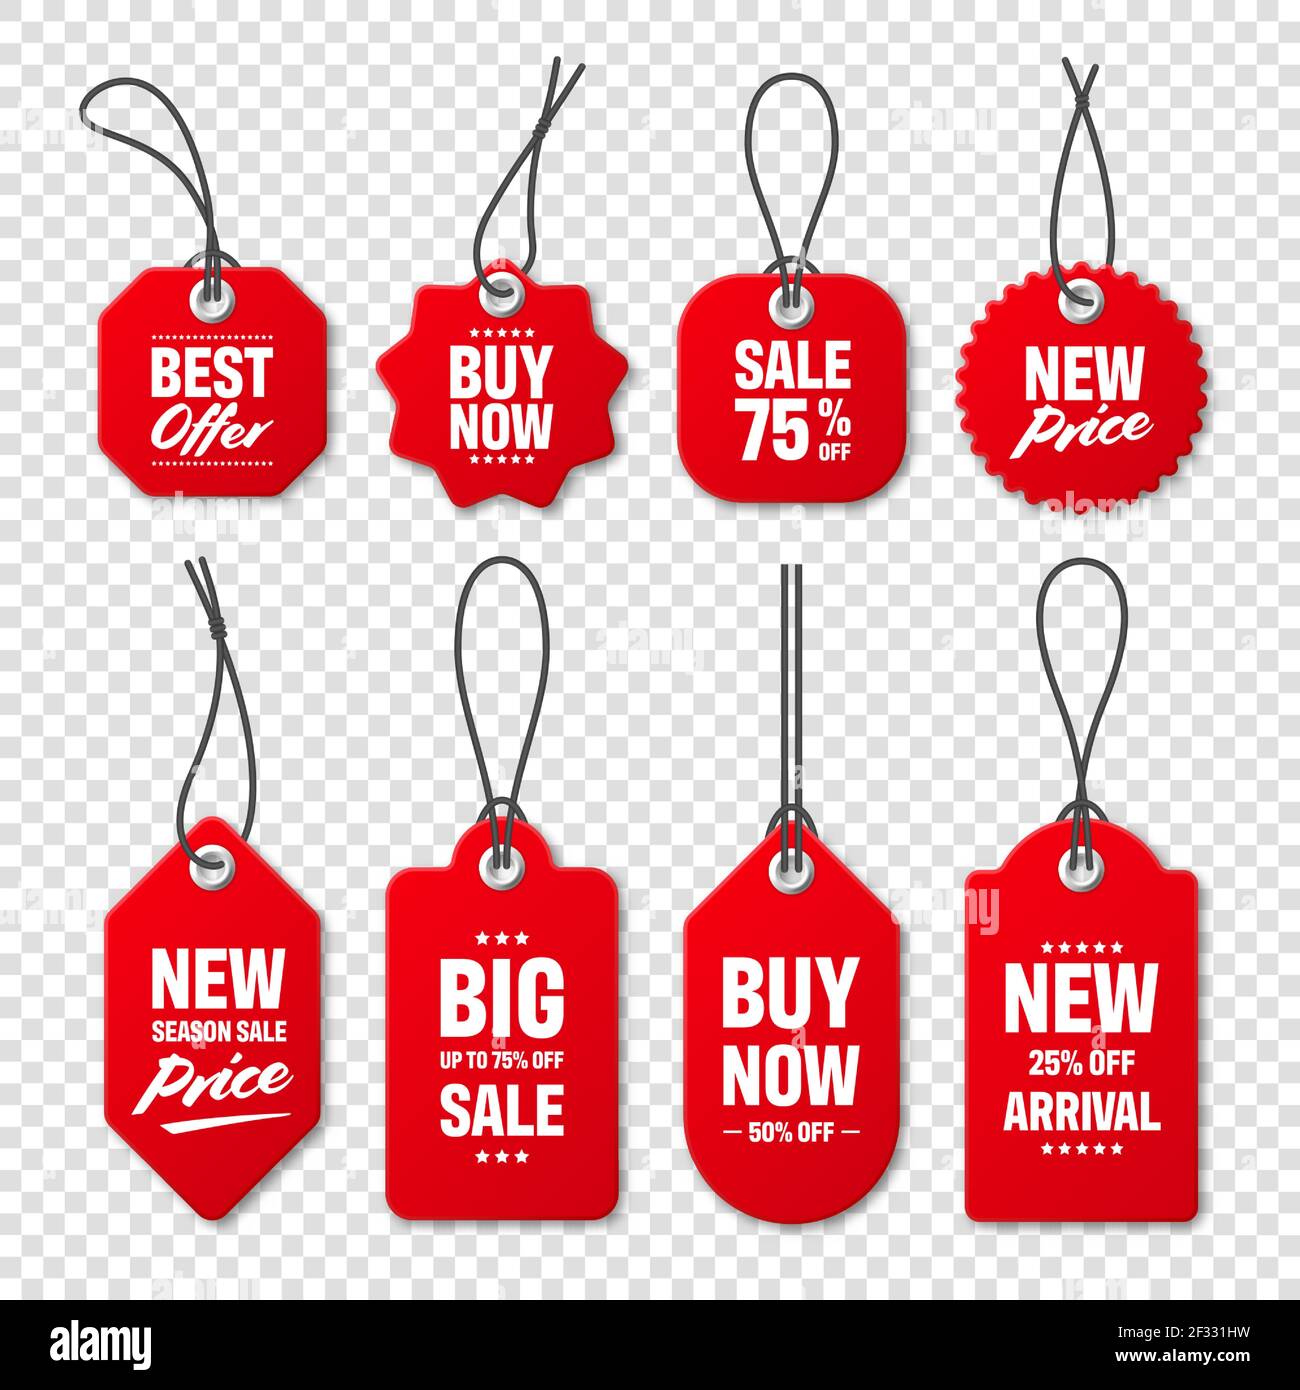 Best deal today sticker for christmas sale Vector Image